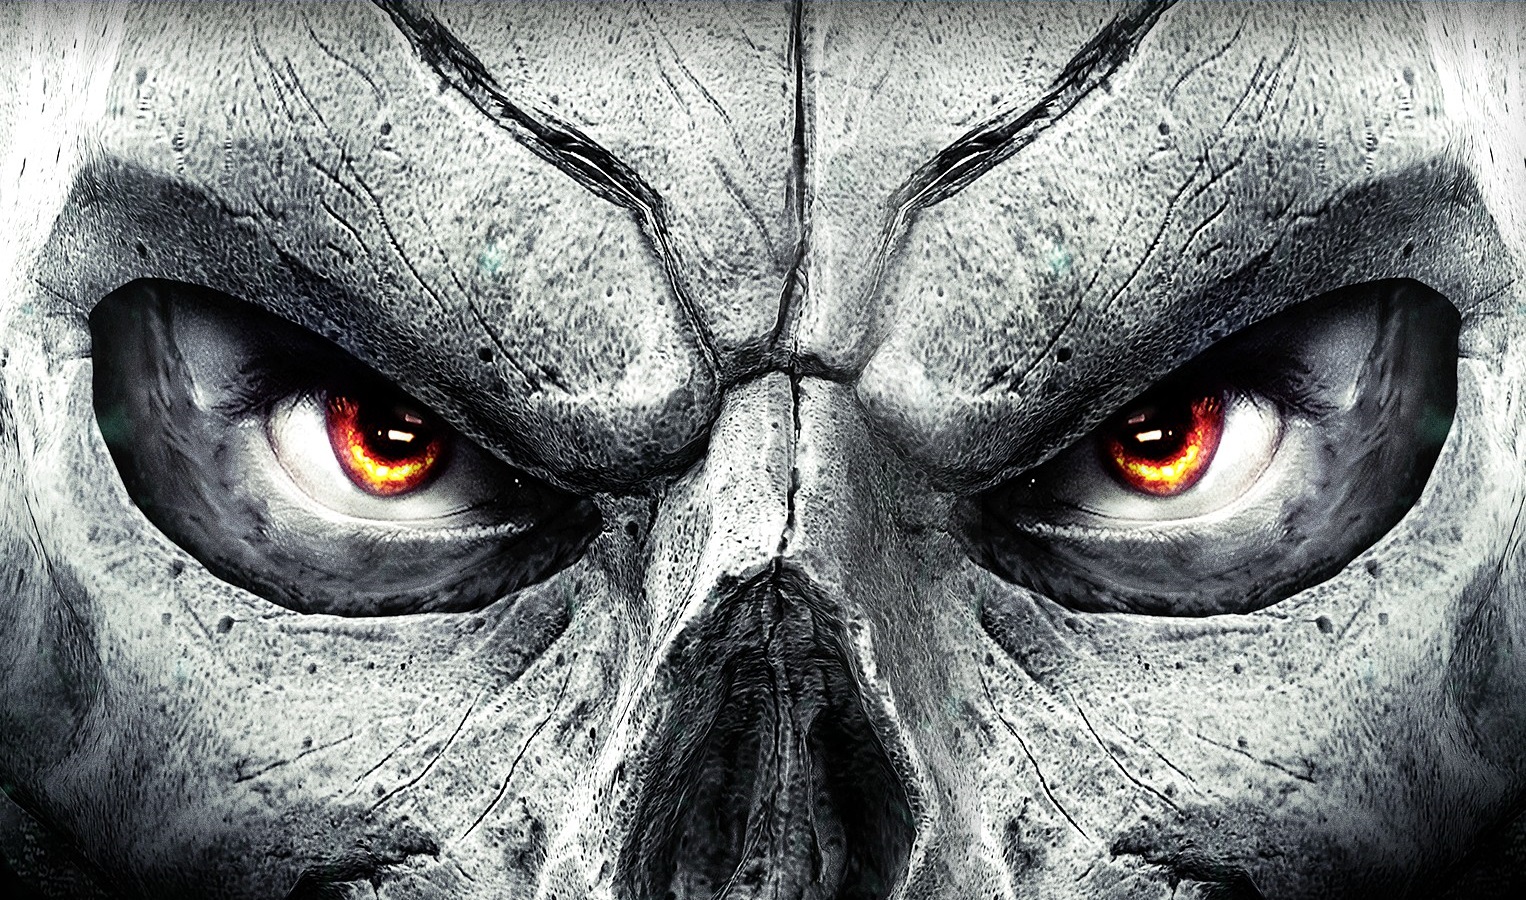 Darksiders II: Deathinitive Edition is Revealed, Handled by Mostly Original Devs